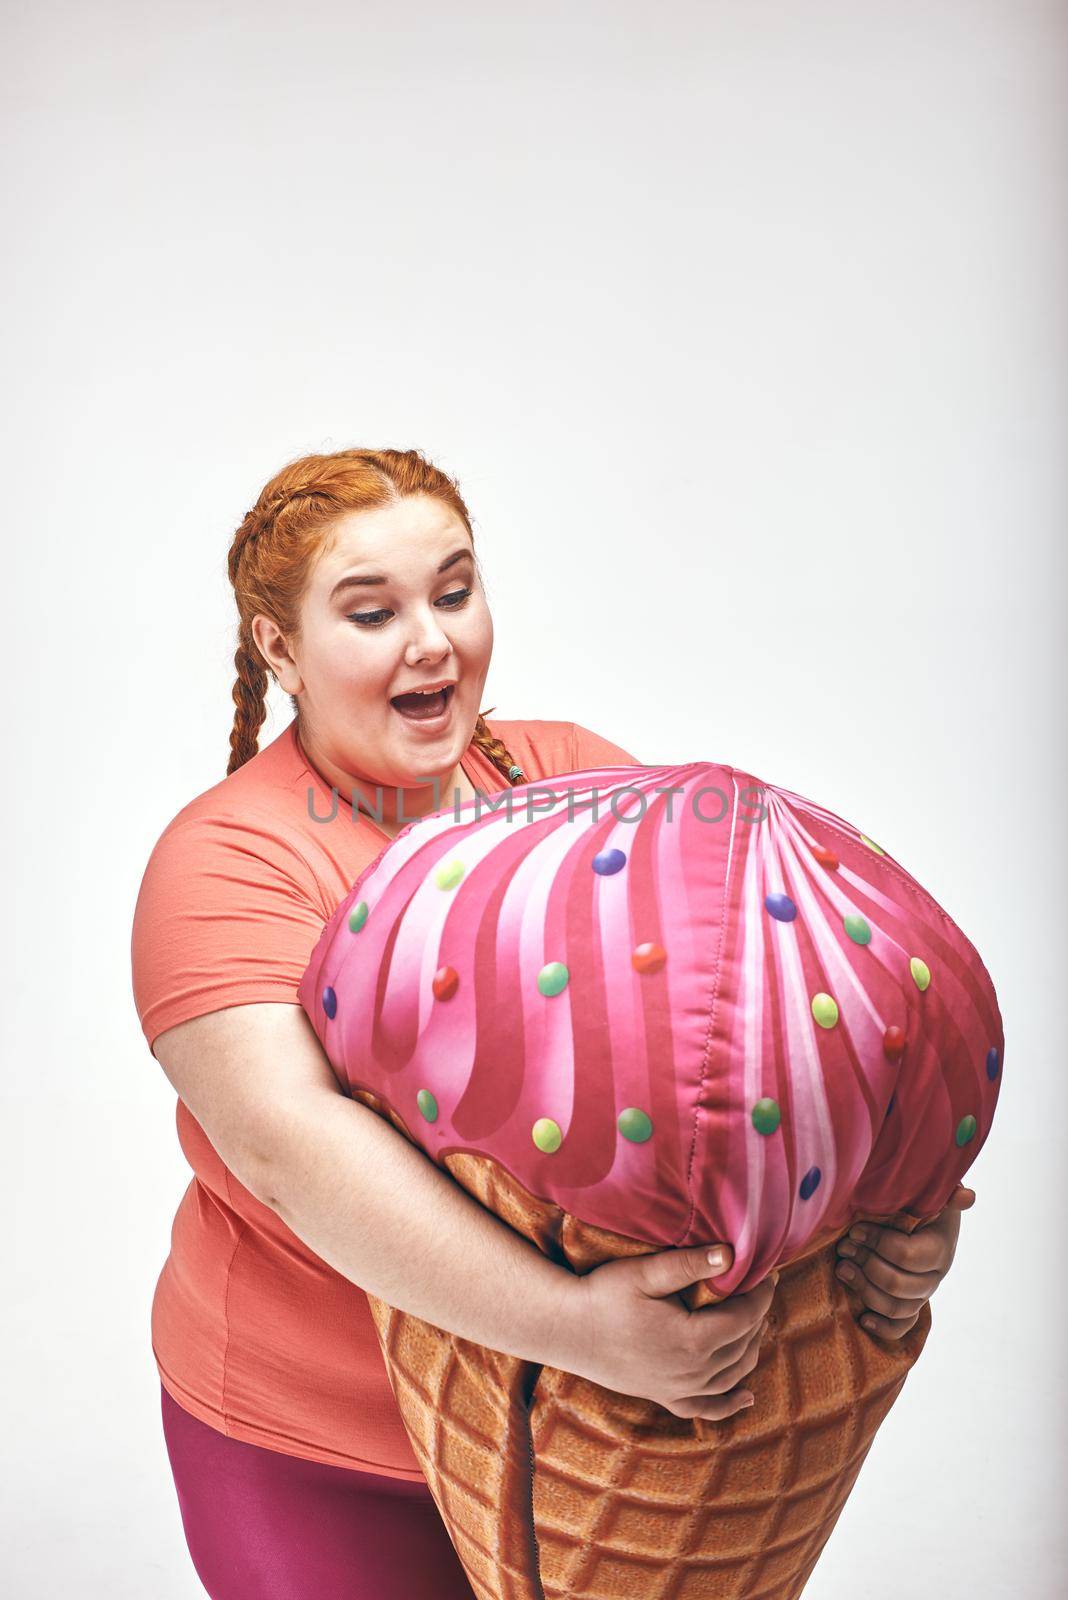 Funny picture of amusing, red haired, chubby woman on white background. Woman is holding a huge ice cream